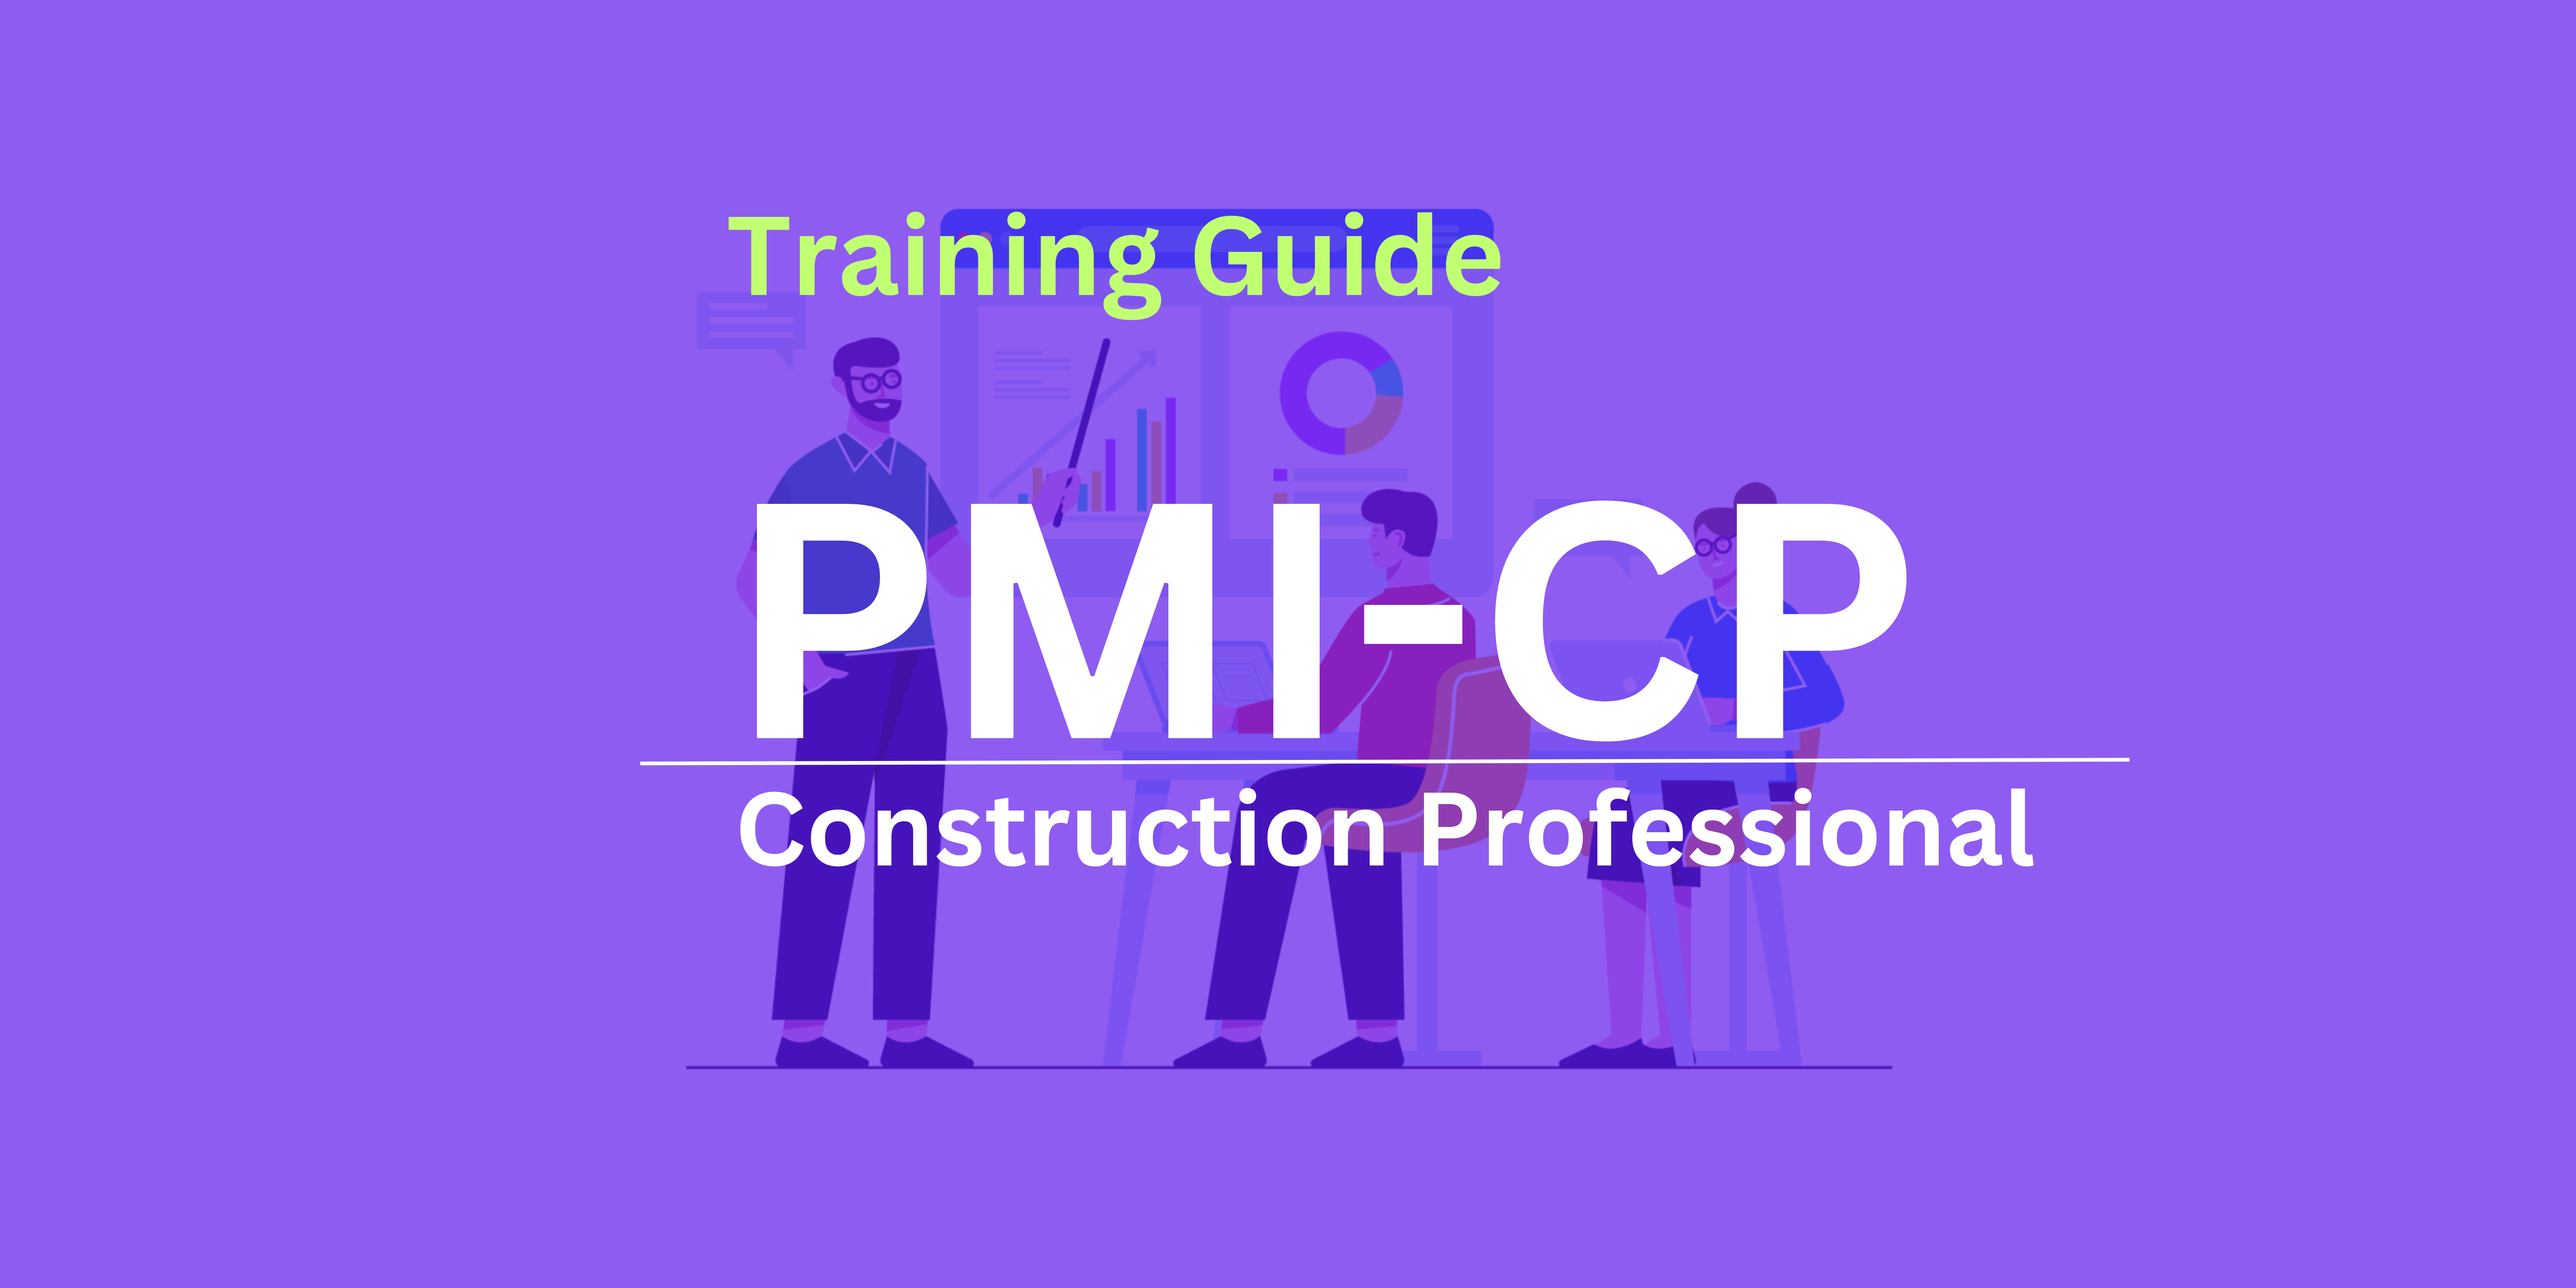 PMI CP Certification Training in UK for Construction Professionals